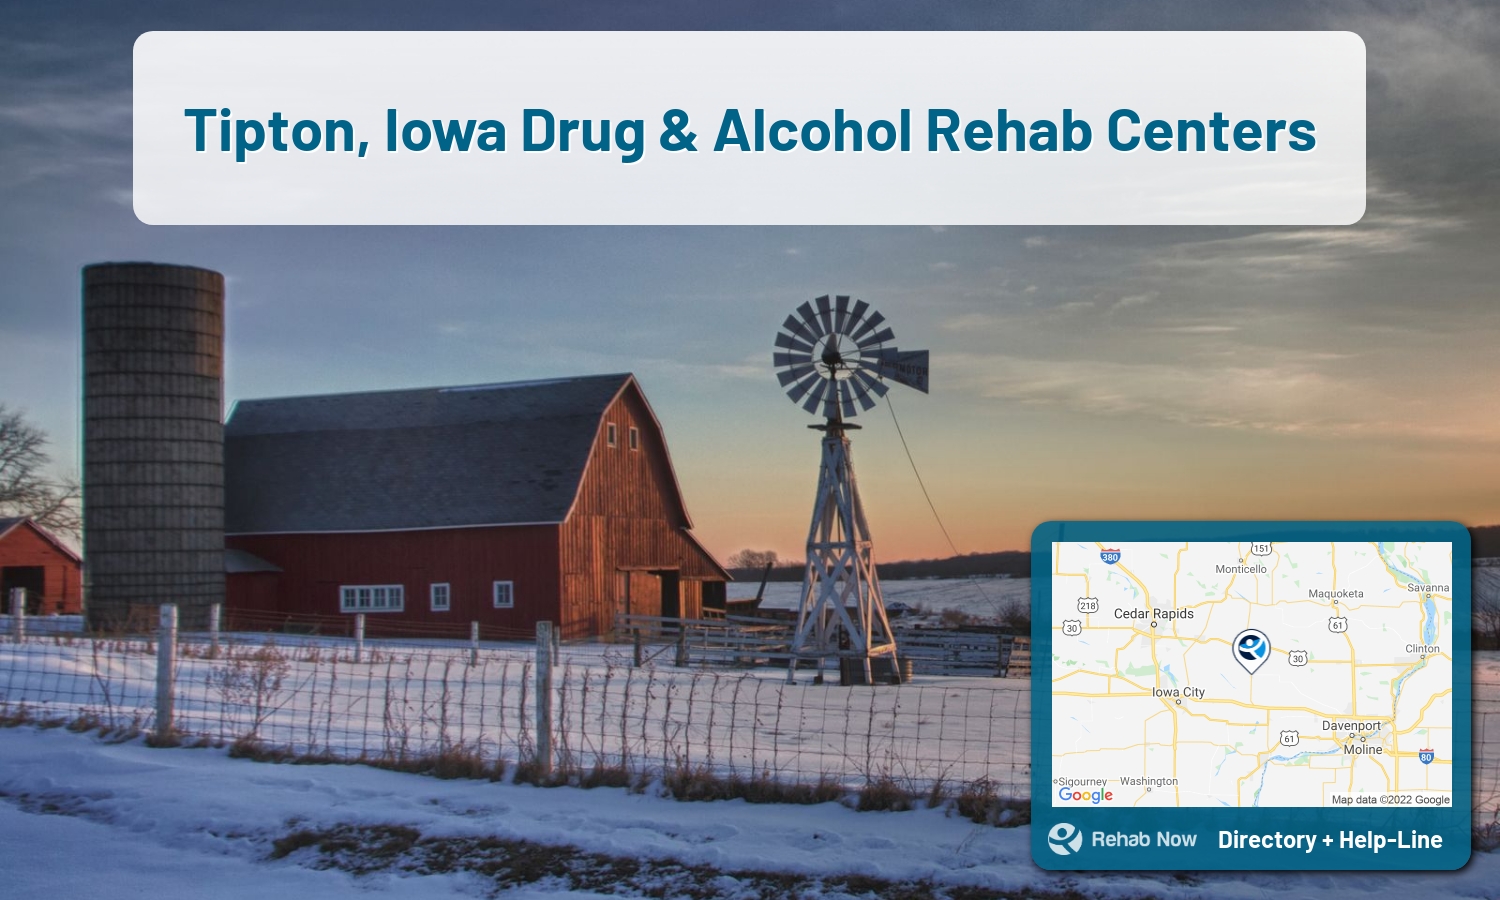 Tipton, IA Treatment Centers. Find drug rehab in Tipton, Iowa, or detox and treatment programs. Get the right help now!